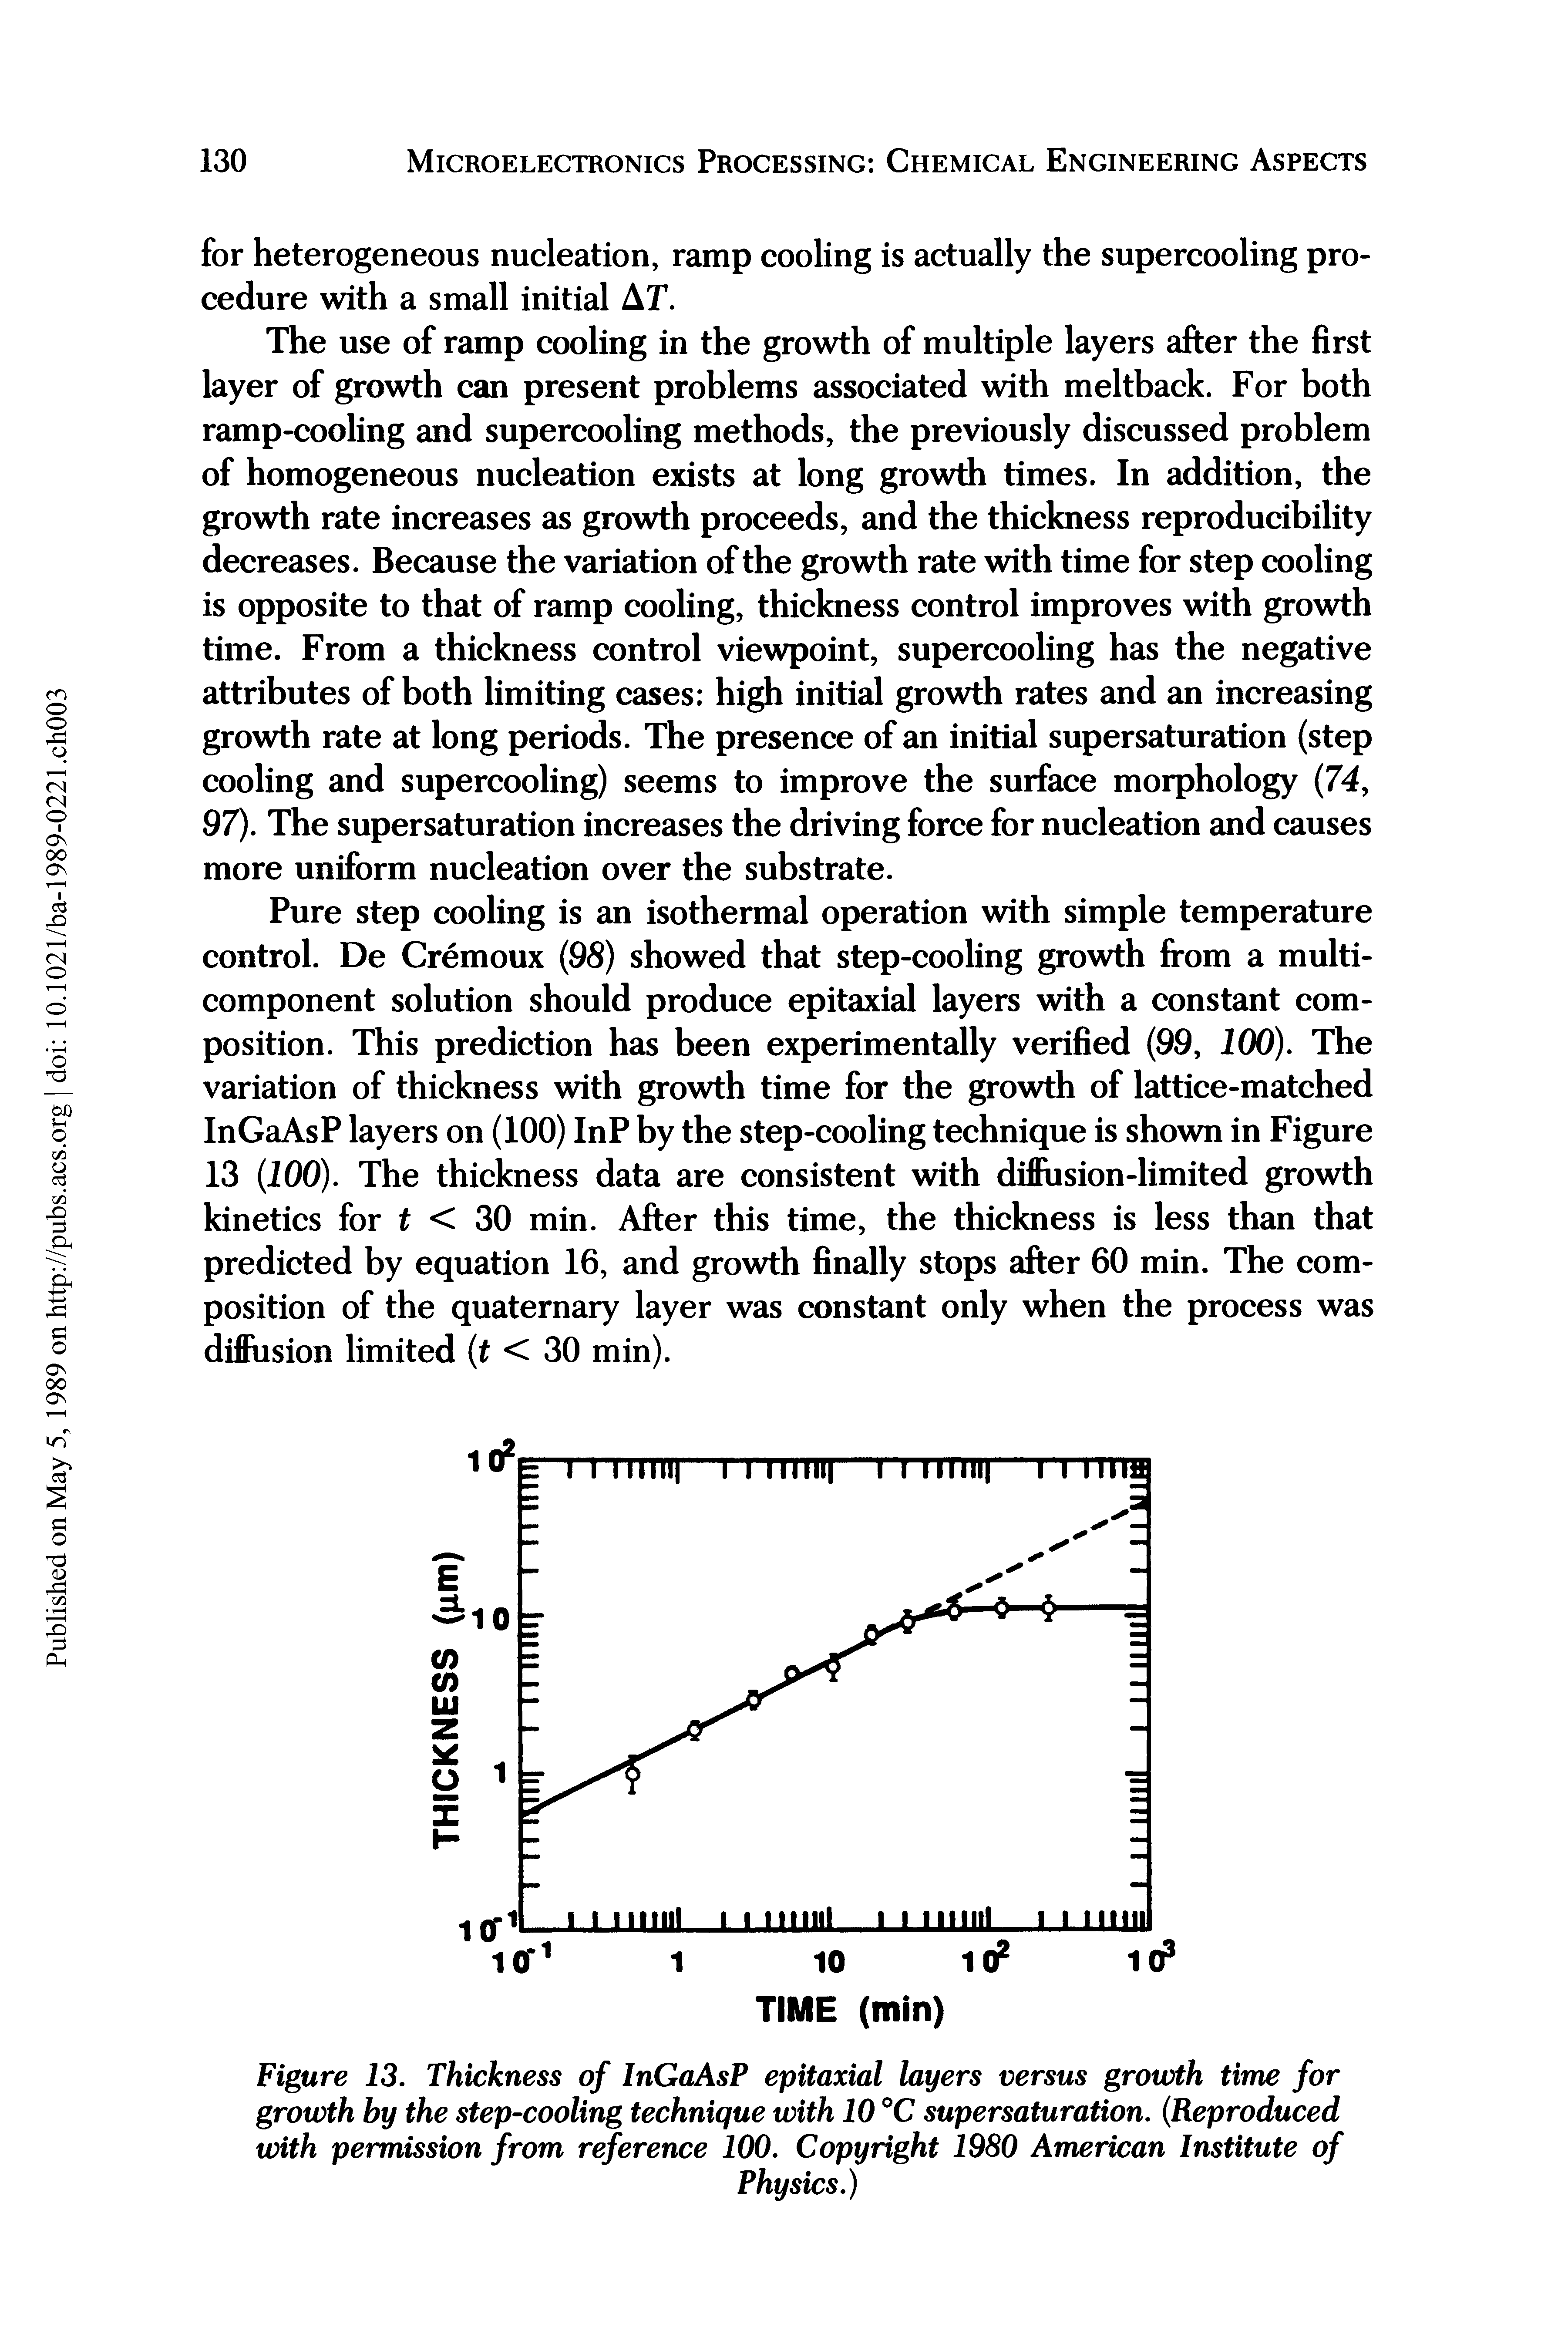 Figure 13. Thickness of InGaAsP epitaxial layers versus growth time for growth by the step-cooling technique with 10 °C supersaturation. (Reproduced with permission from reference 100. Copyright 1980 American Institute of...